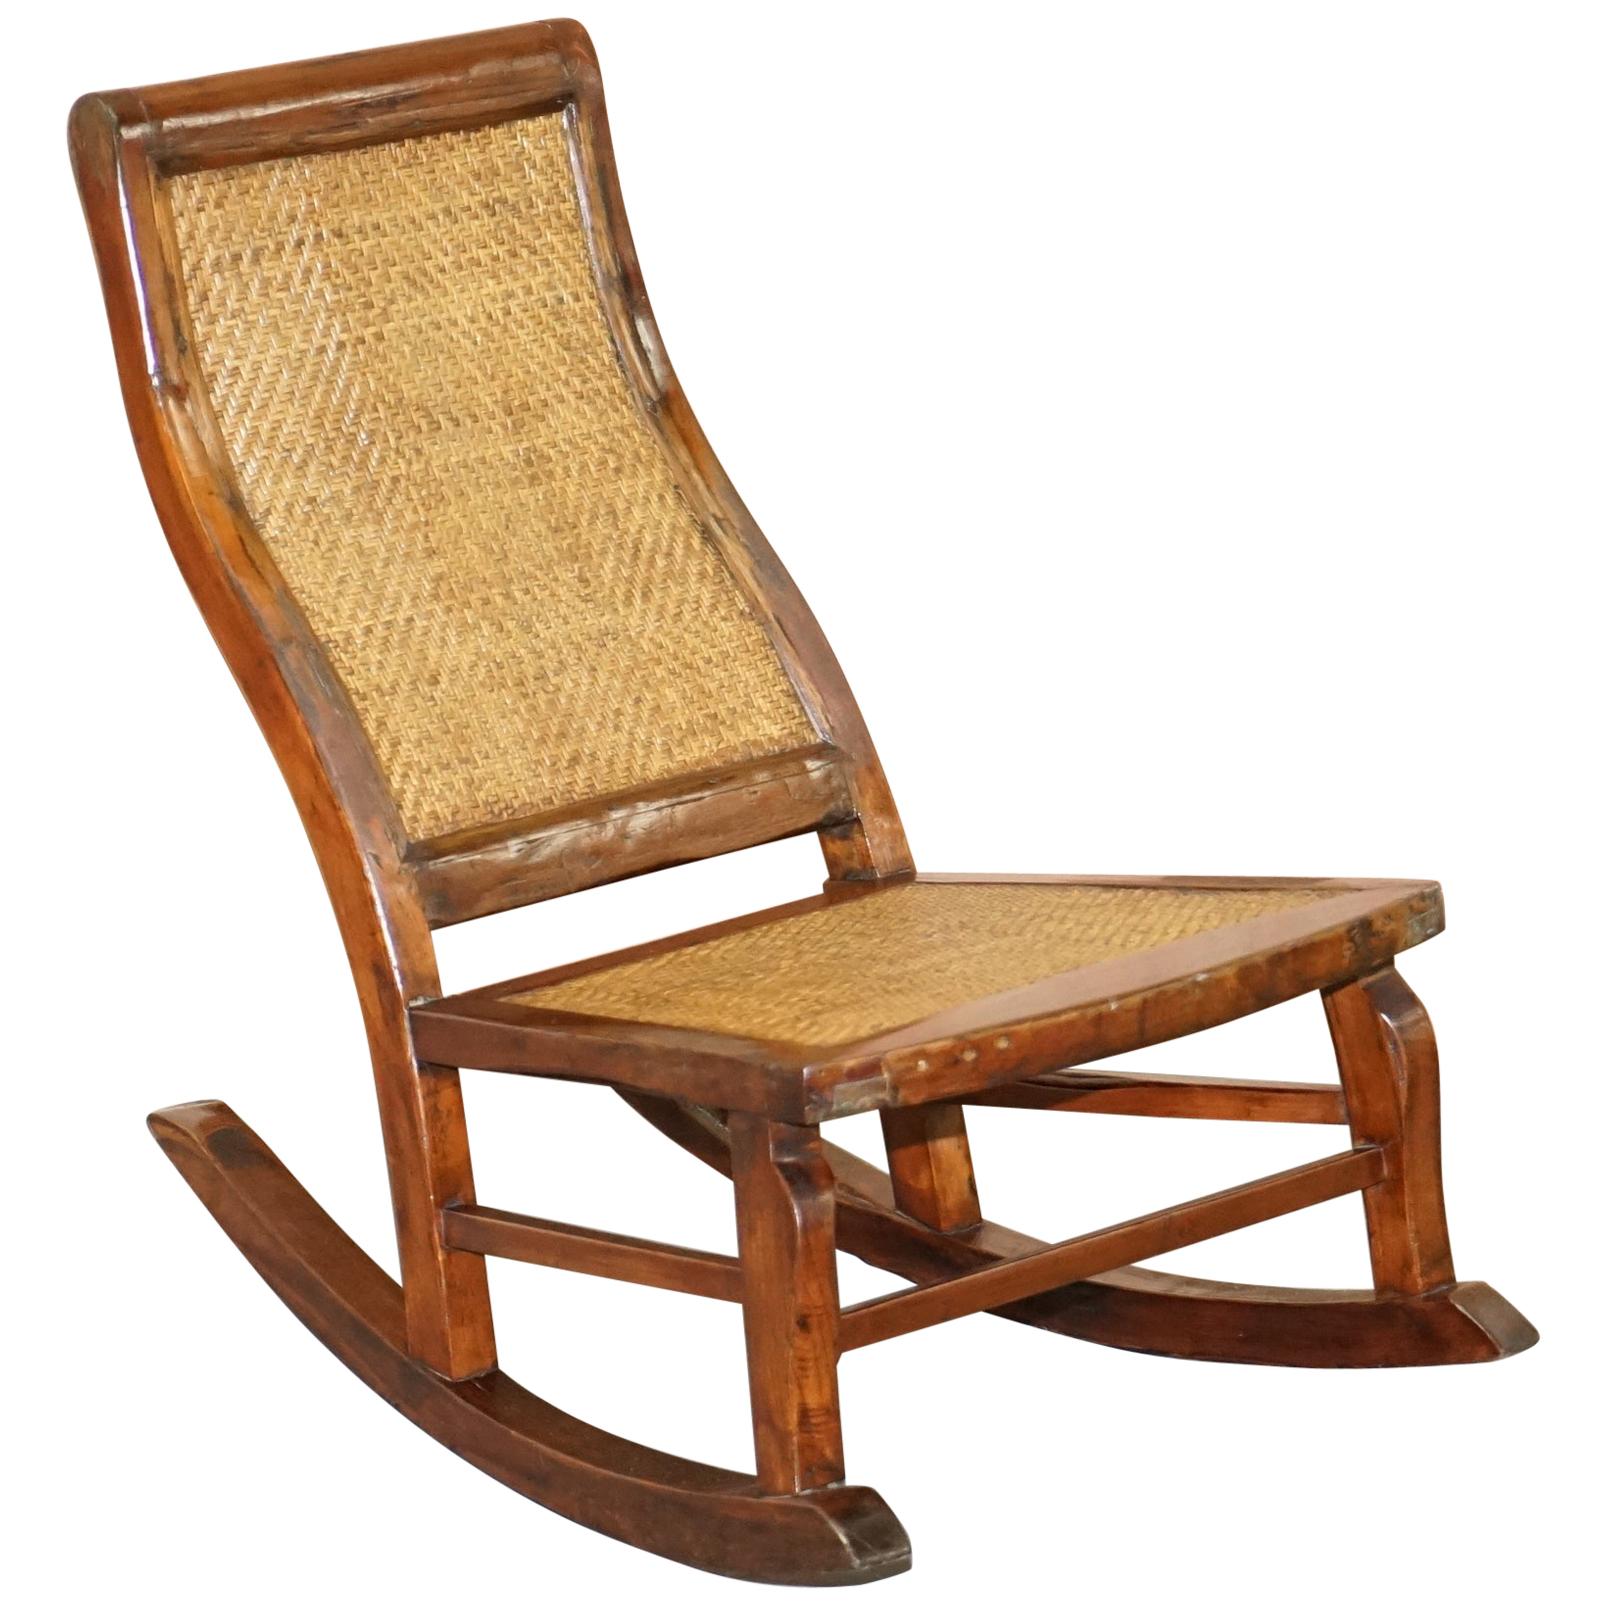 Small Children's Antique Rocking Chair Ideal for Children Upto 6 Years Old